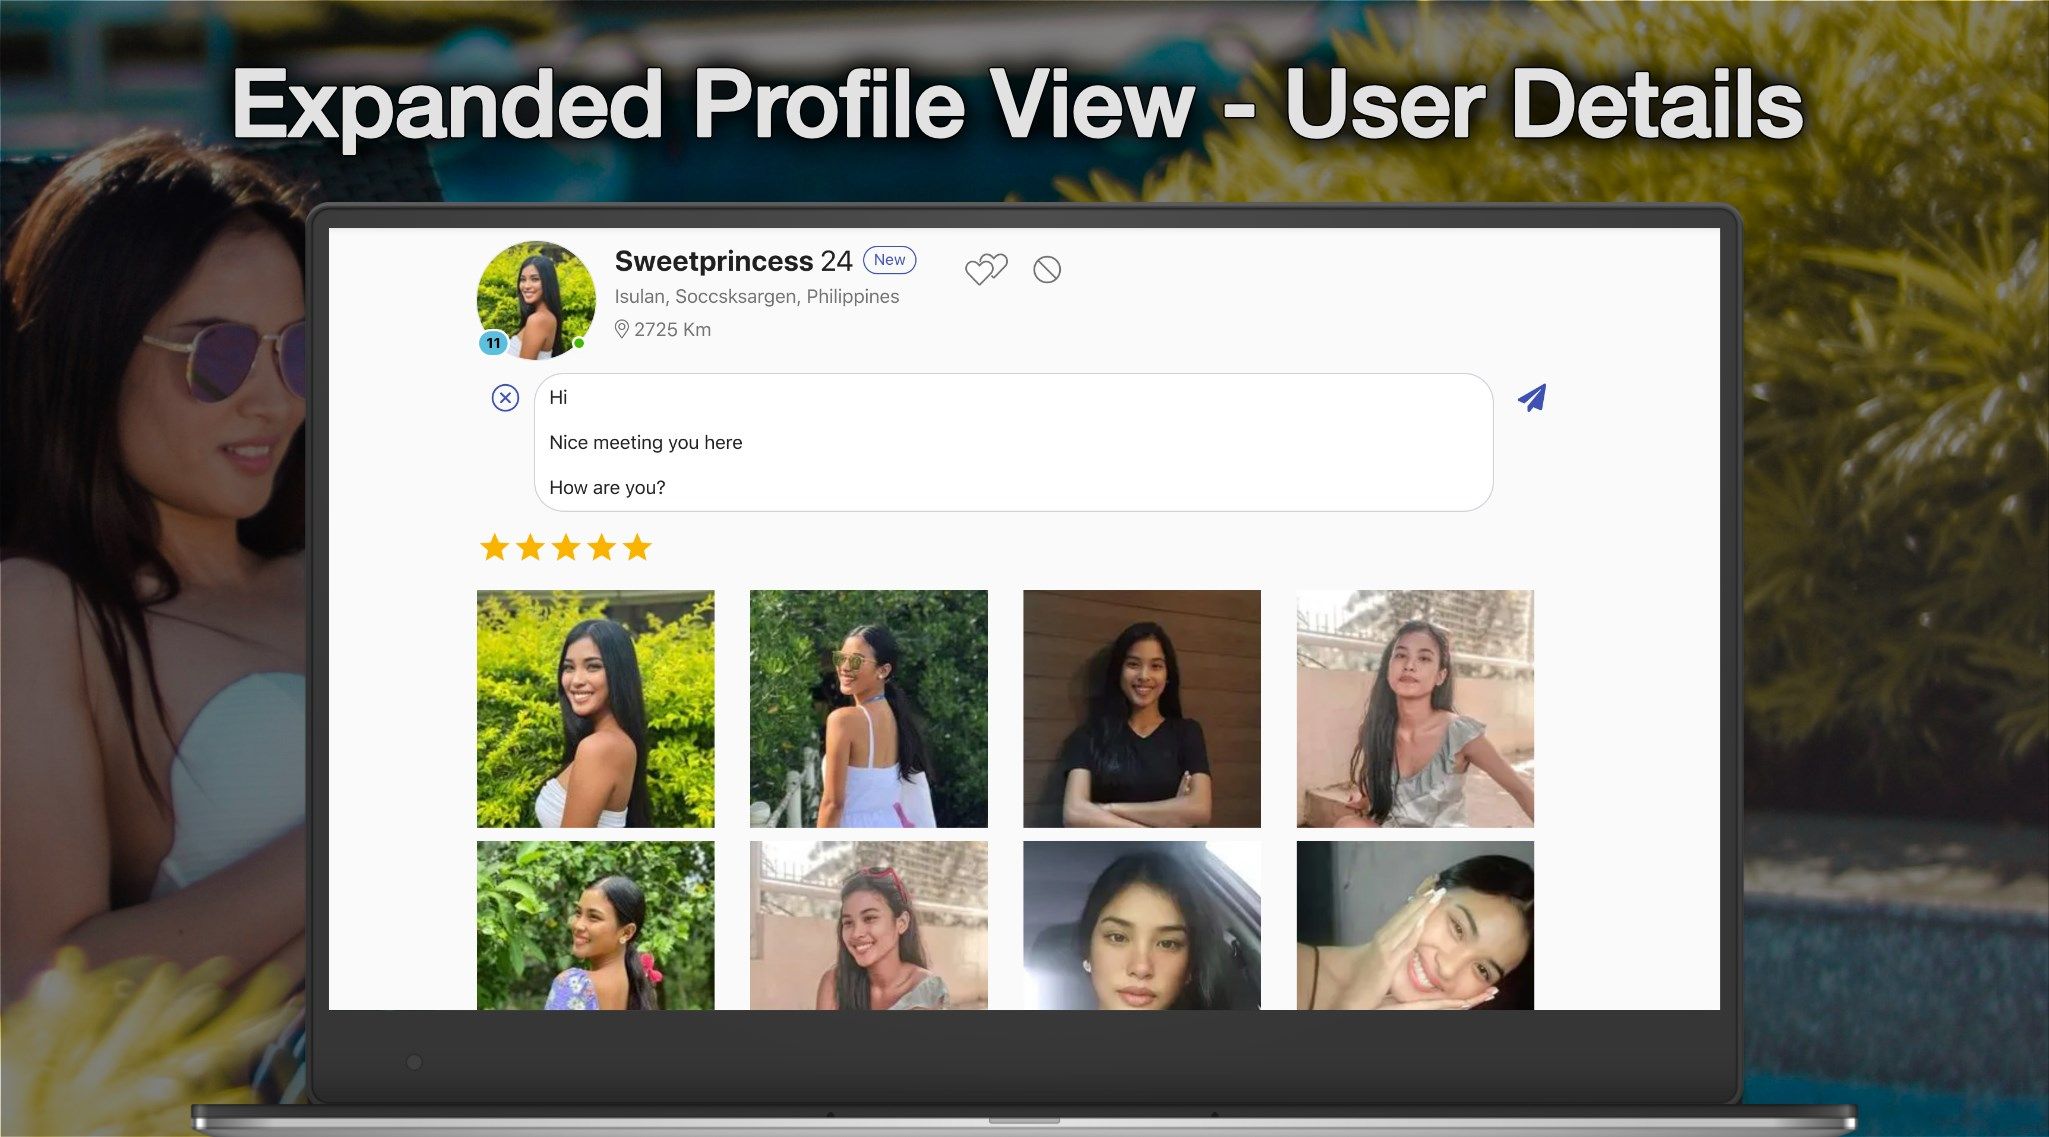 Expanded Profile view - full user details